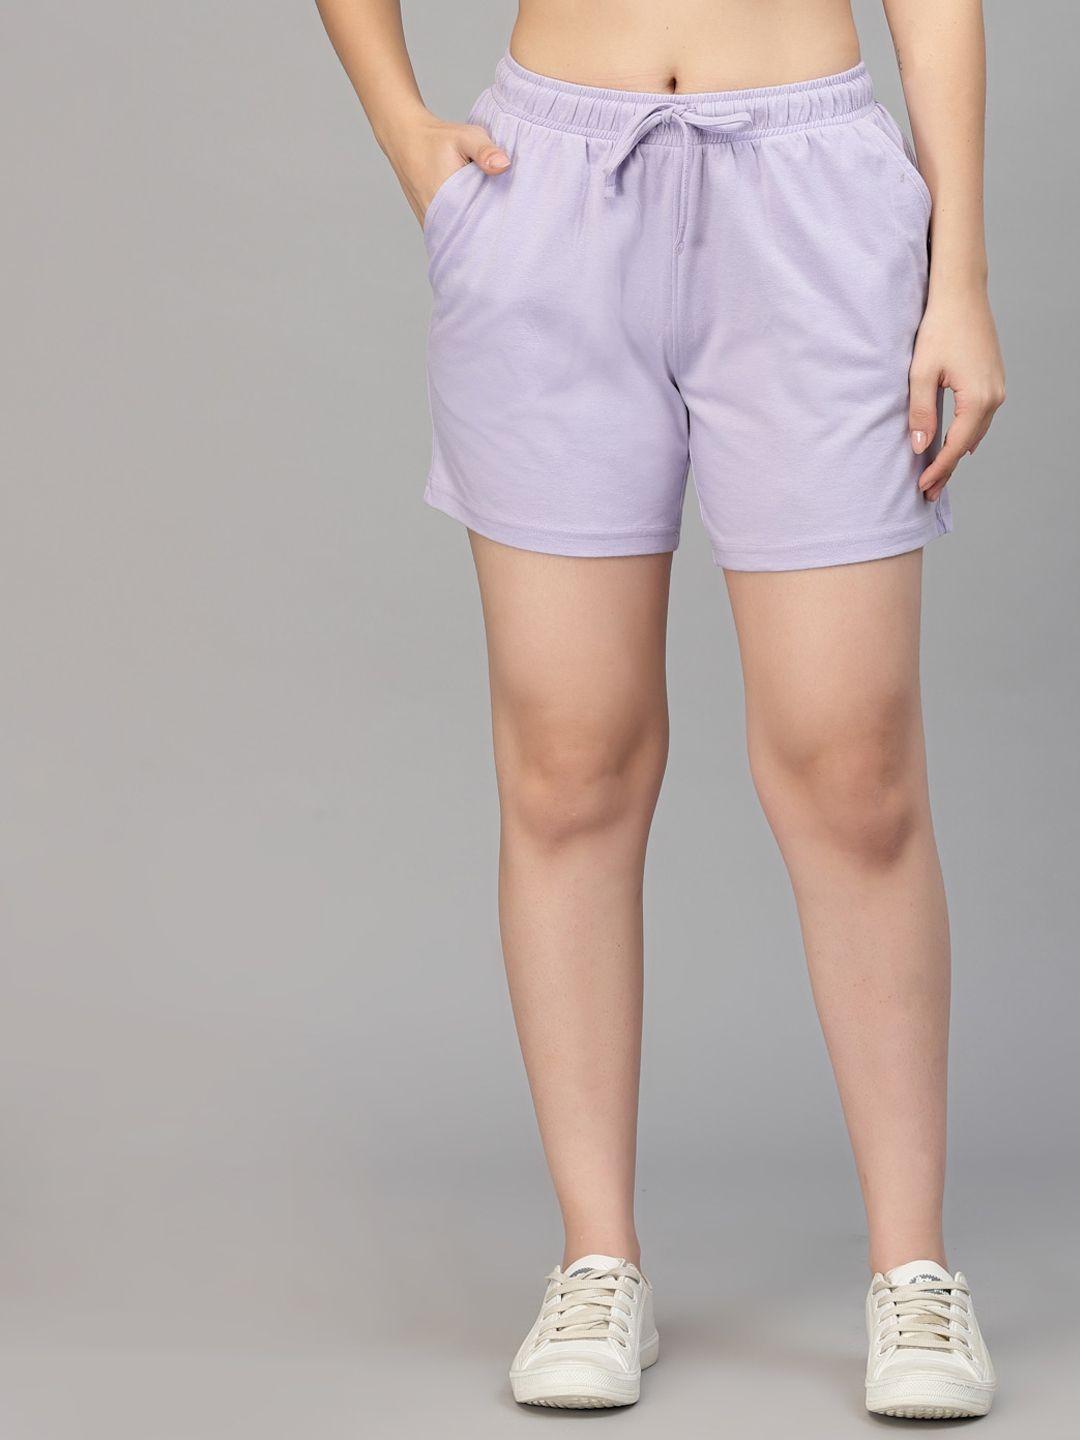 strong and brave women mid-rise odour free cotton shorts